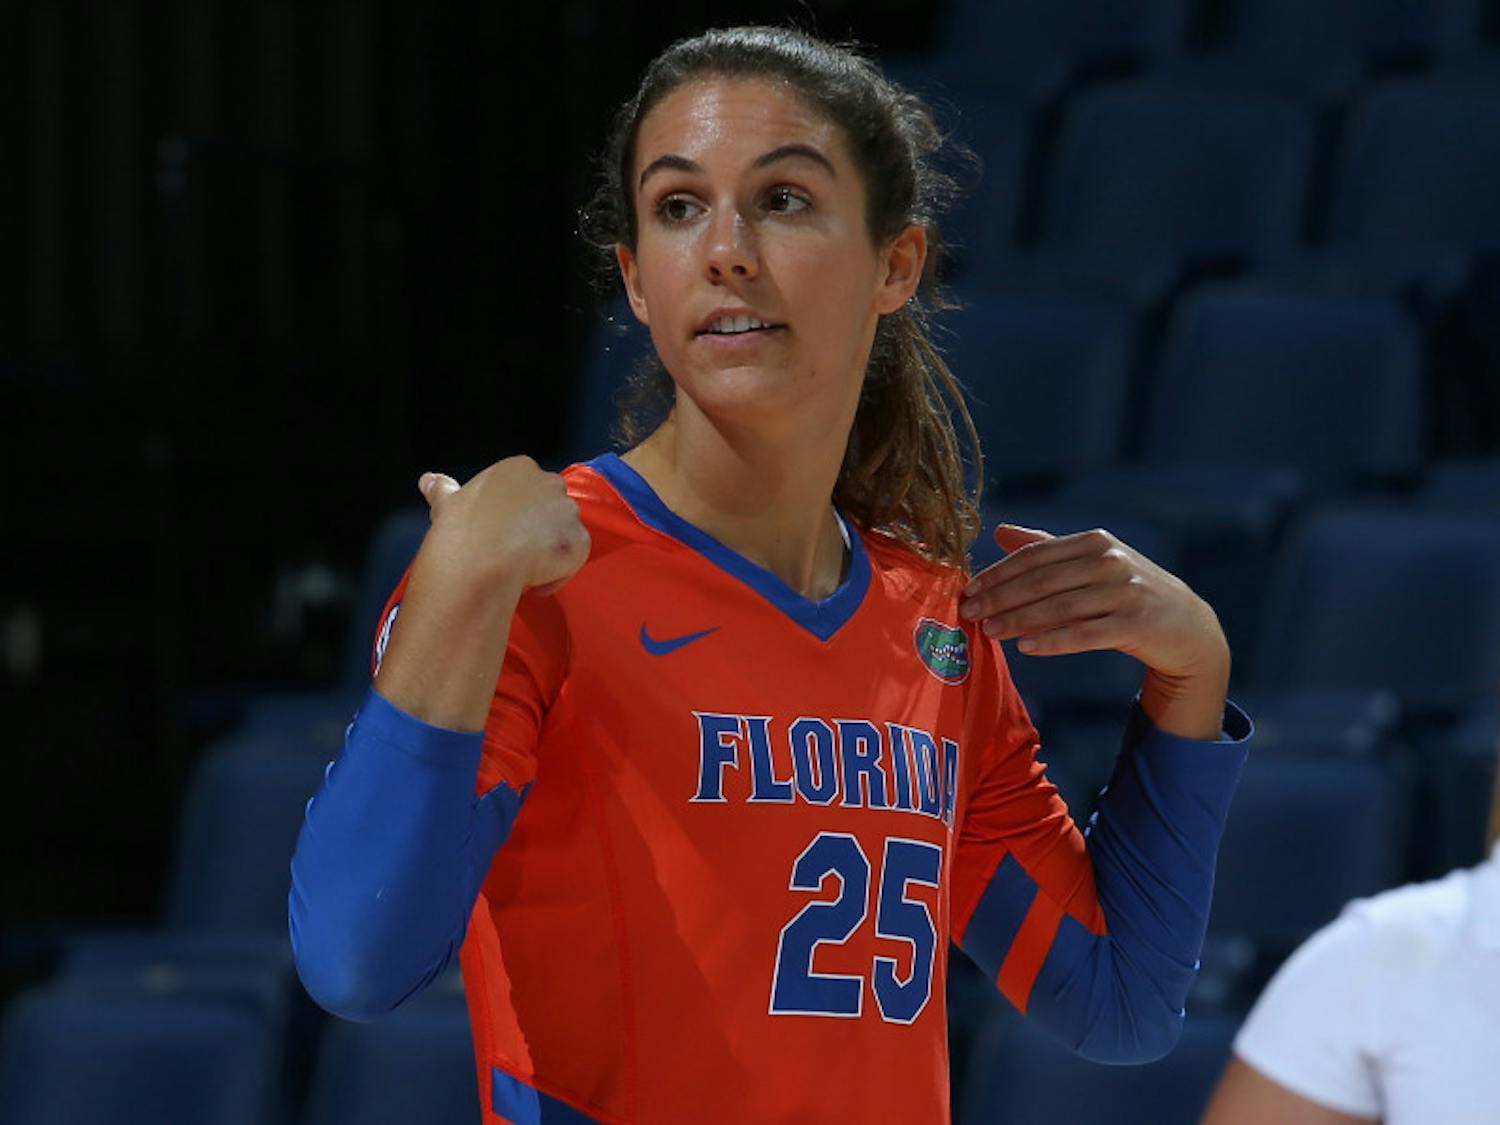 Lindsey Rogers watched as both of her parents dealt with cancer. Tonight at 7, the Gators will participate in the annual ‘Dig Pink’ match, which aims to raise funds and increase awareness for breast cancer.